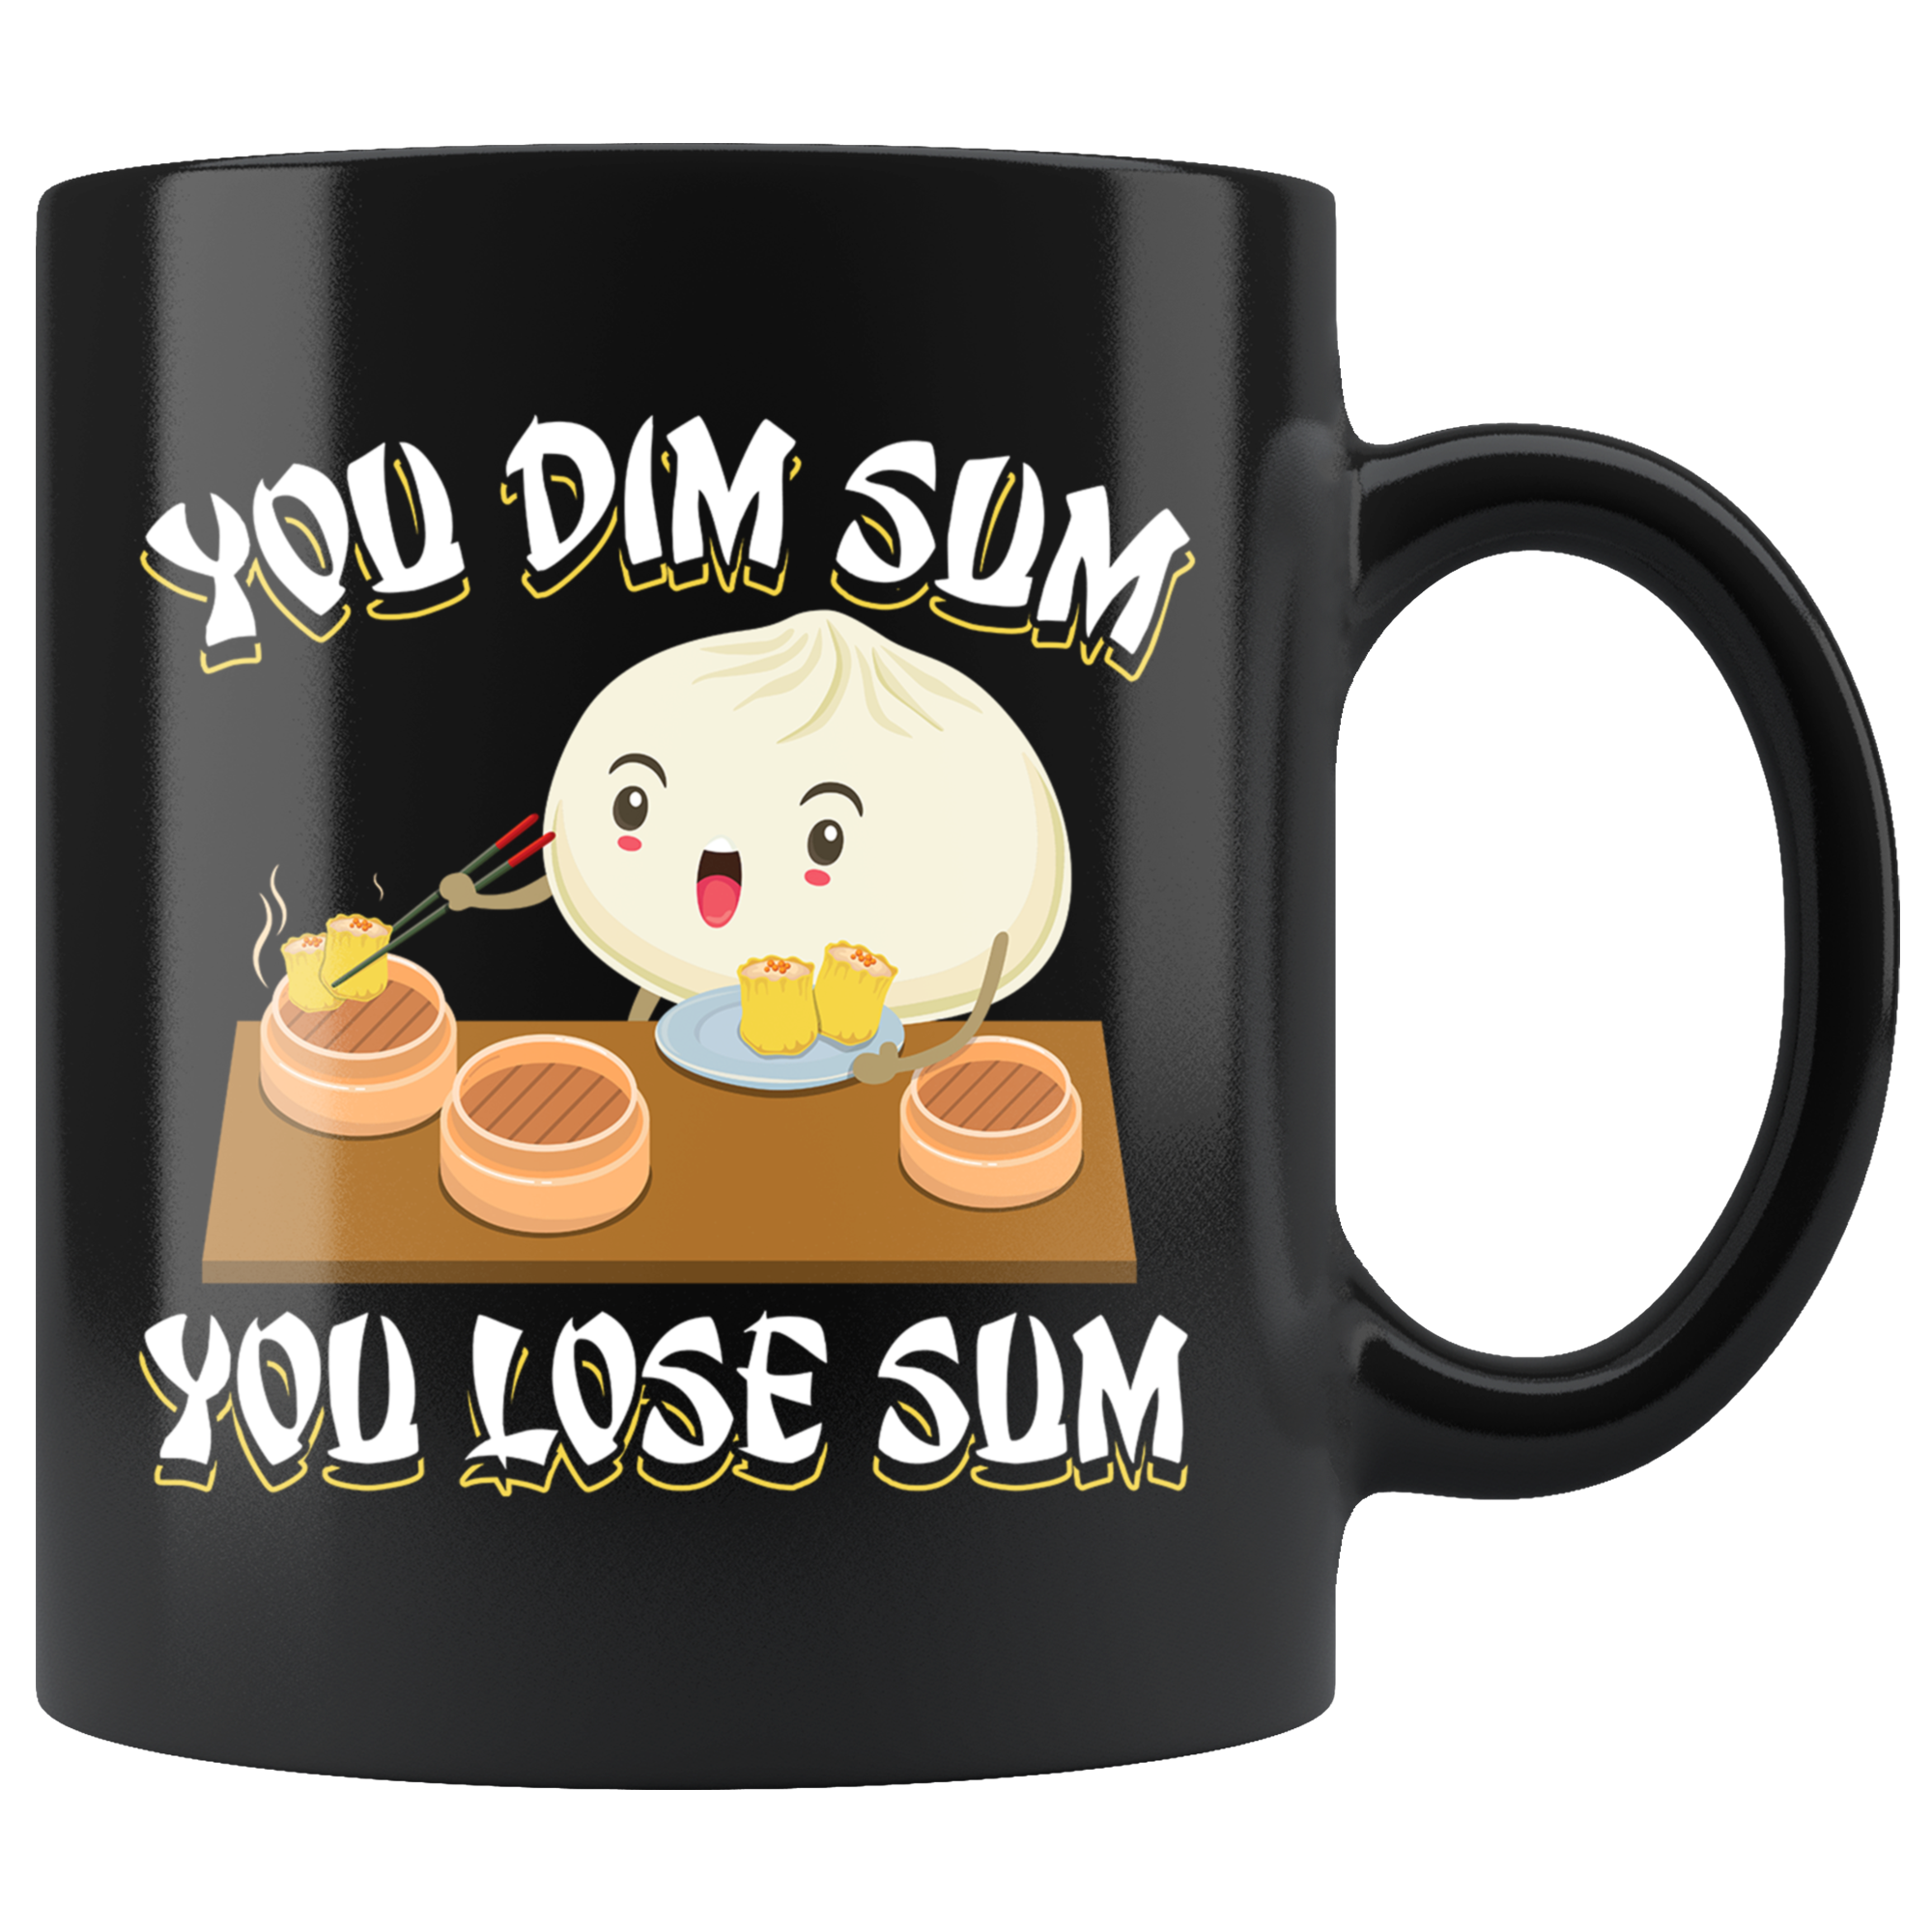 My Loyalty And Your Lack Of Taste San Francisco 49ers Mugs – Best Funny  Store